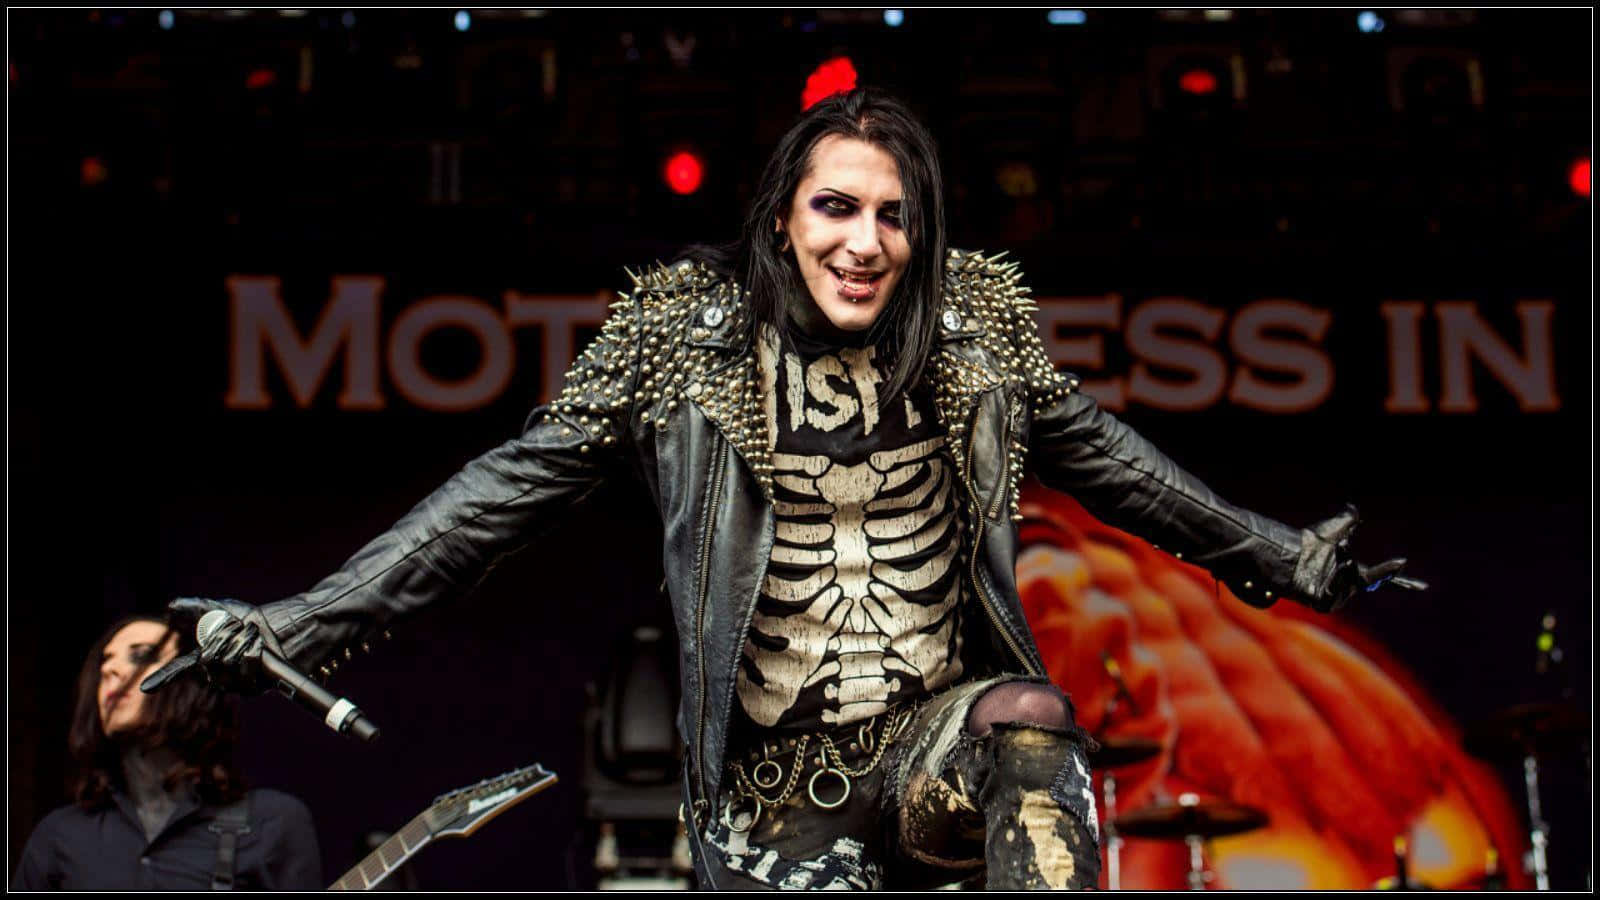 Motionless In White Live Performance Background